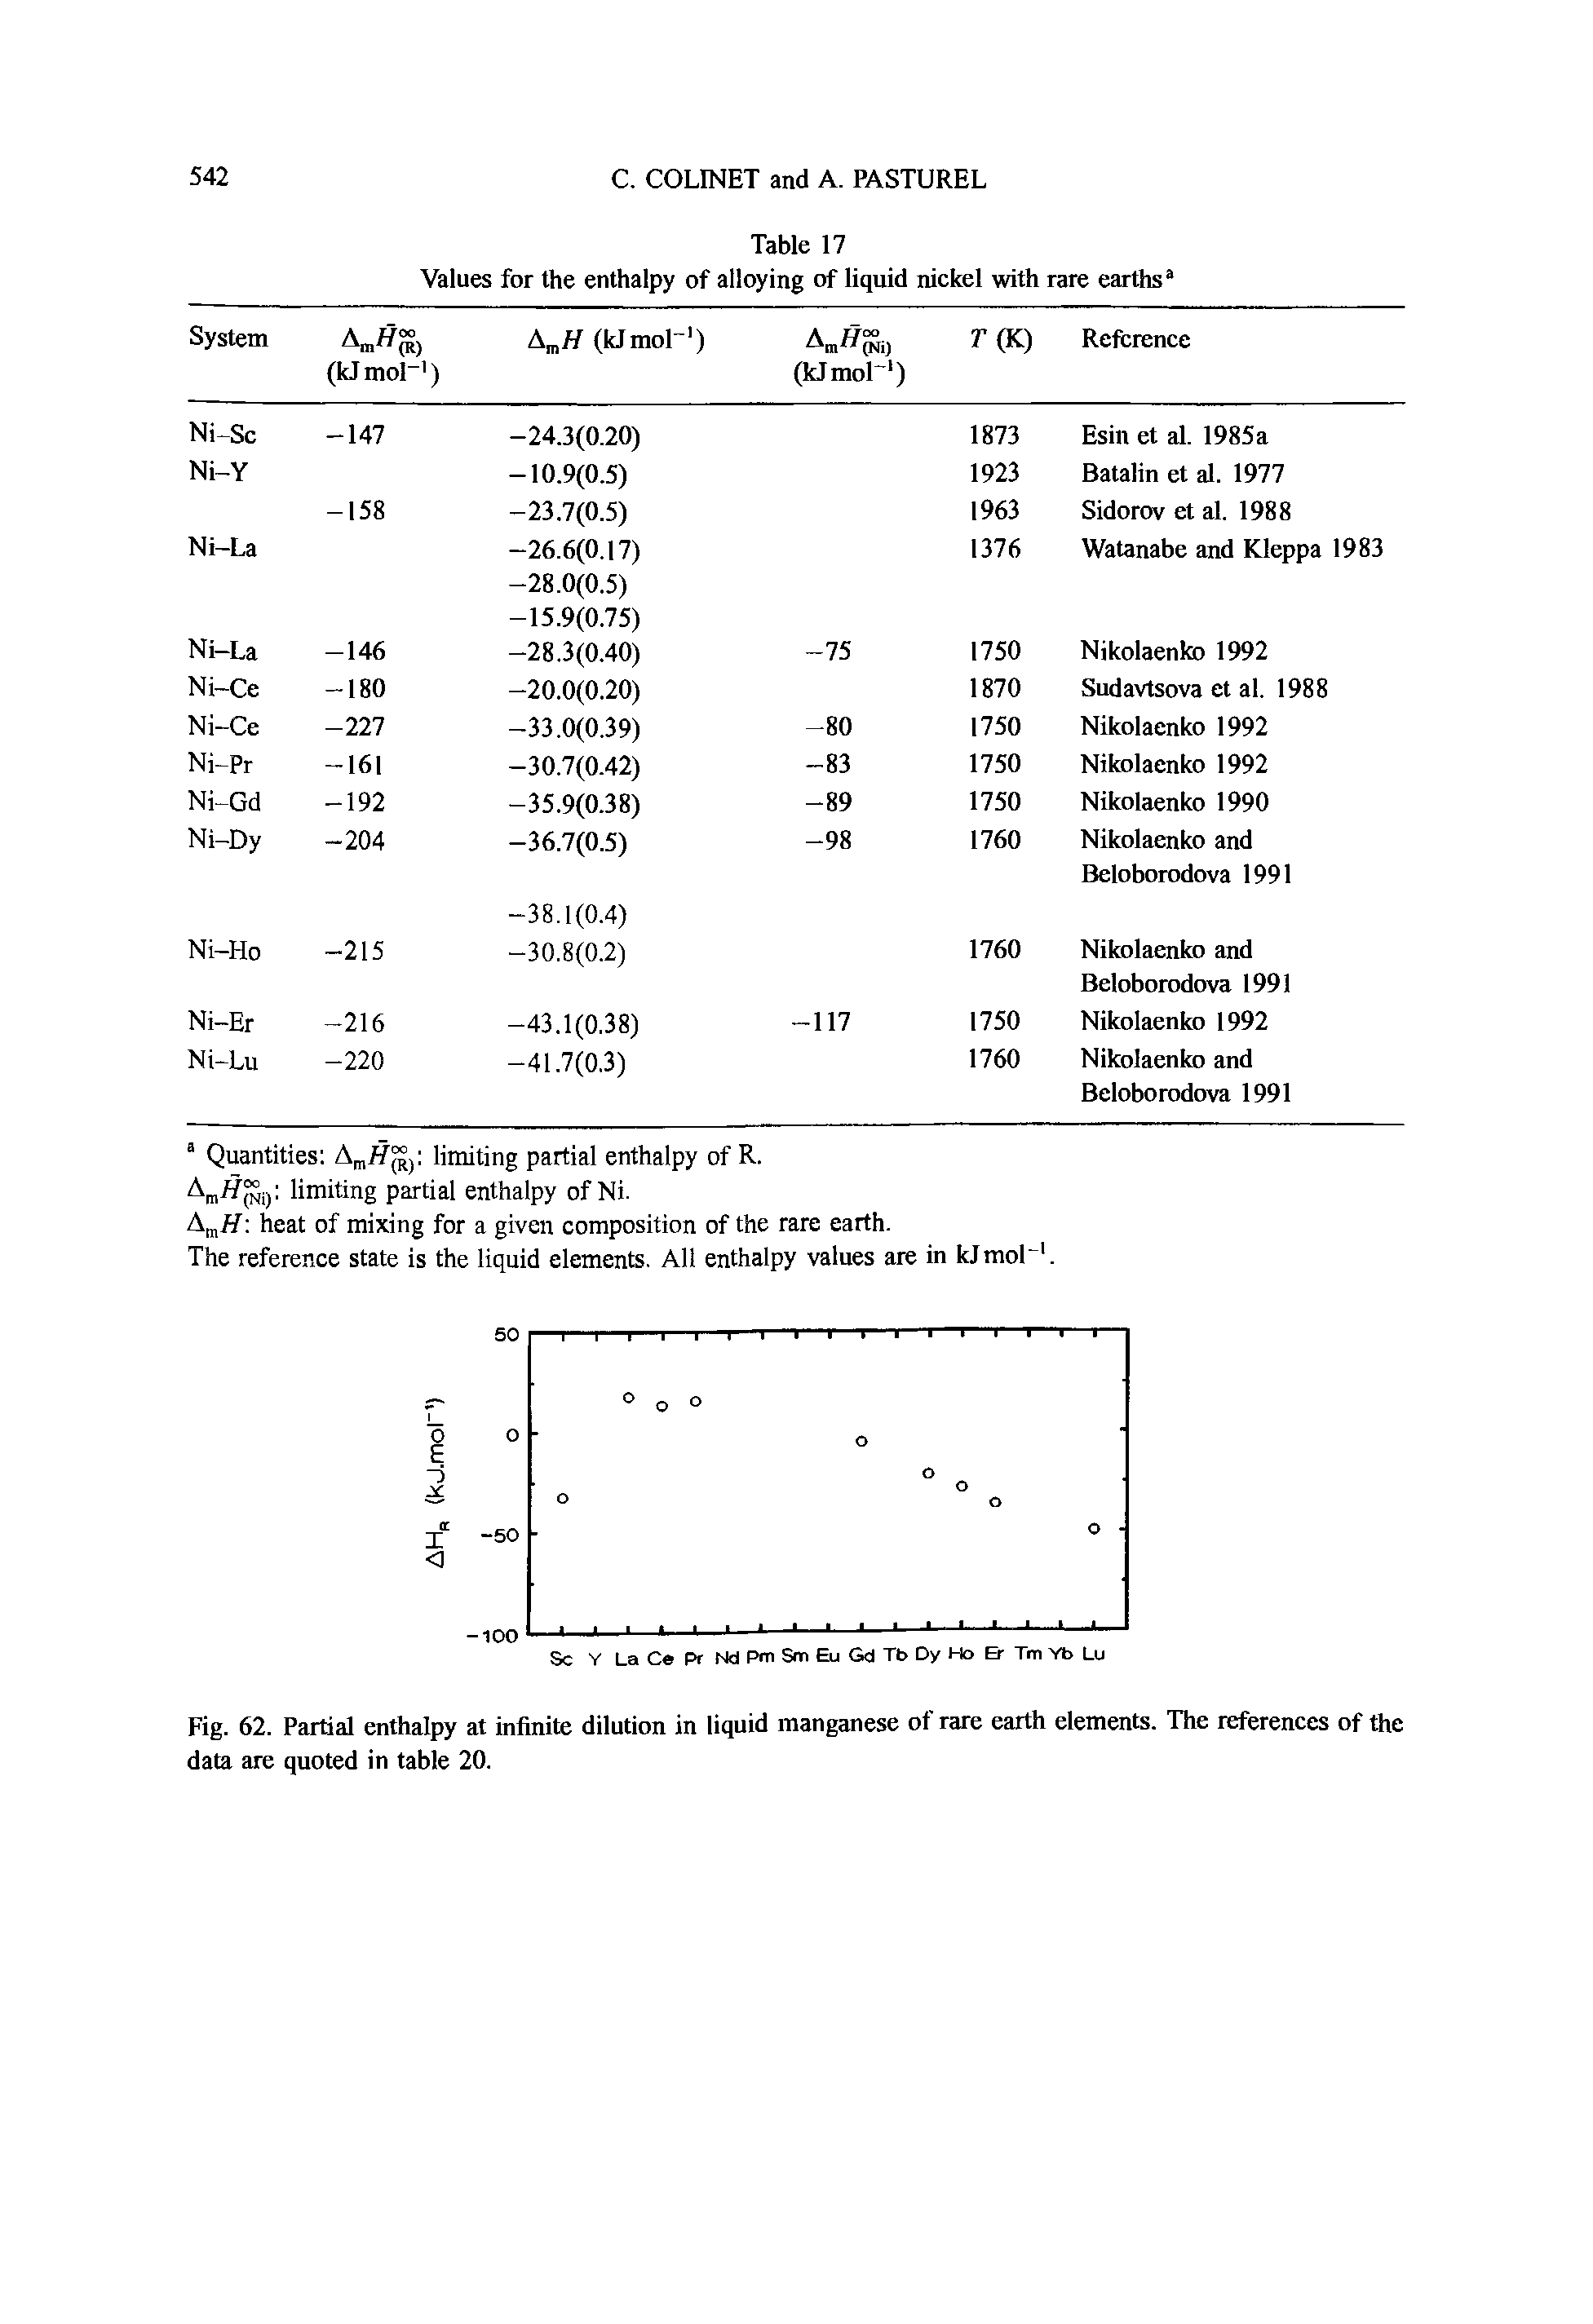 Fig. 62. Partial enthalpy at infinite dilution in liquid manganese of rare earth elements. The references of the data are quoted in table 20.